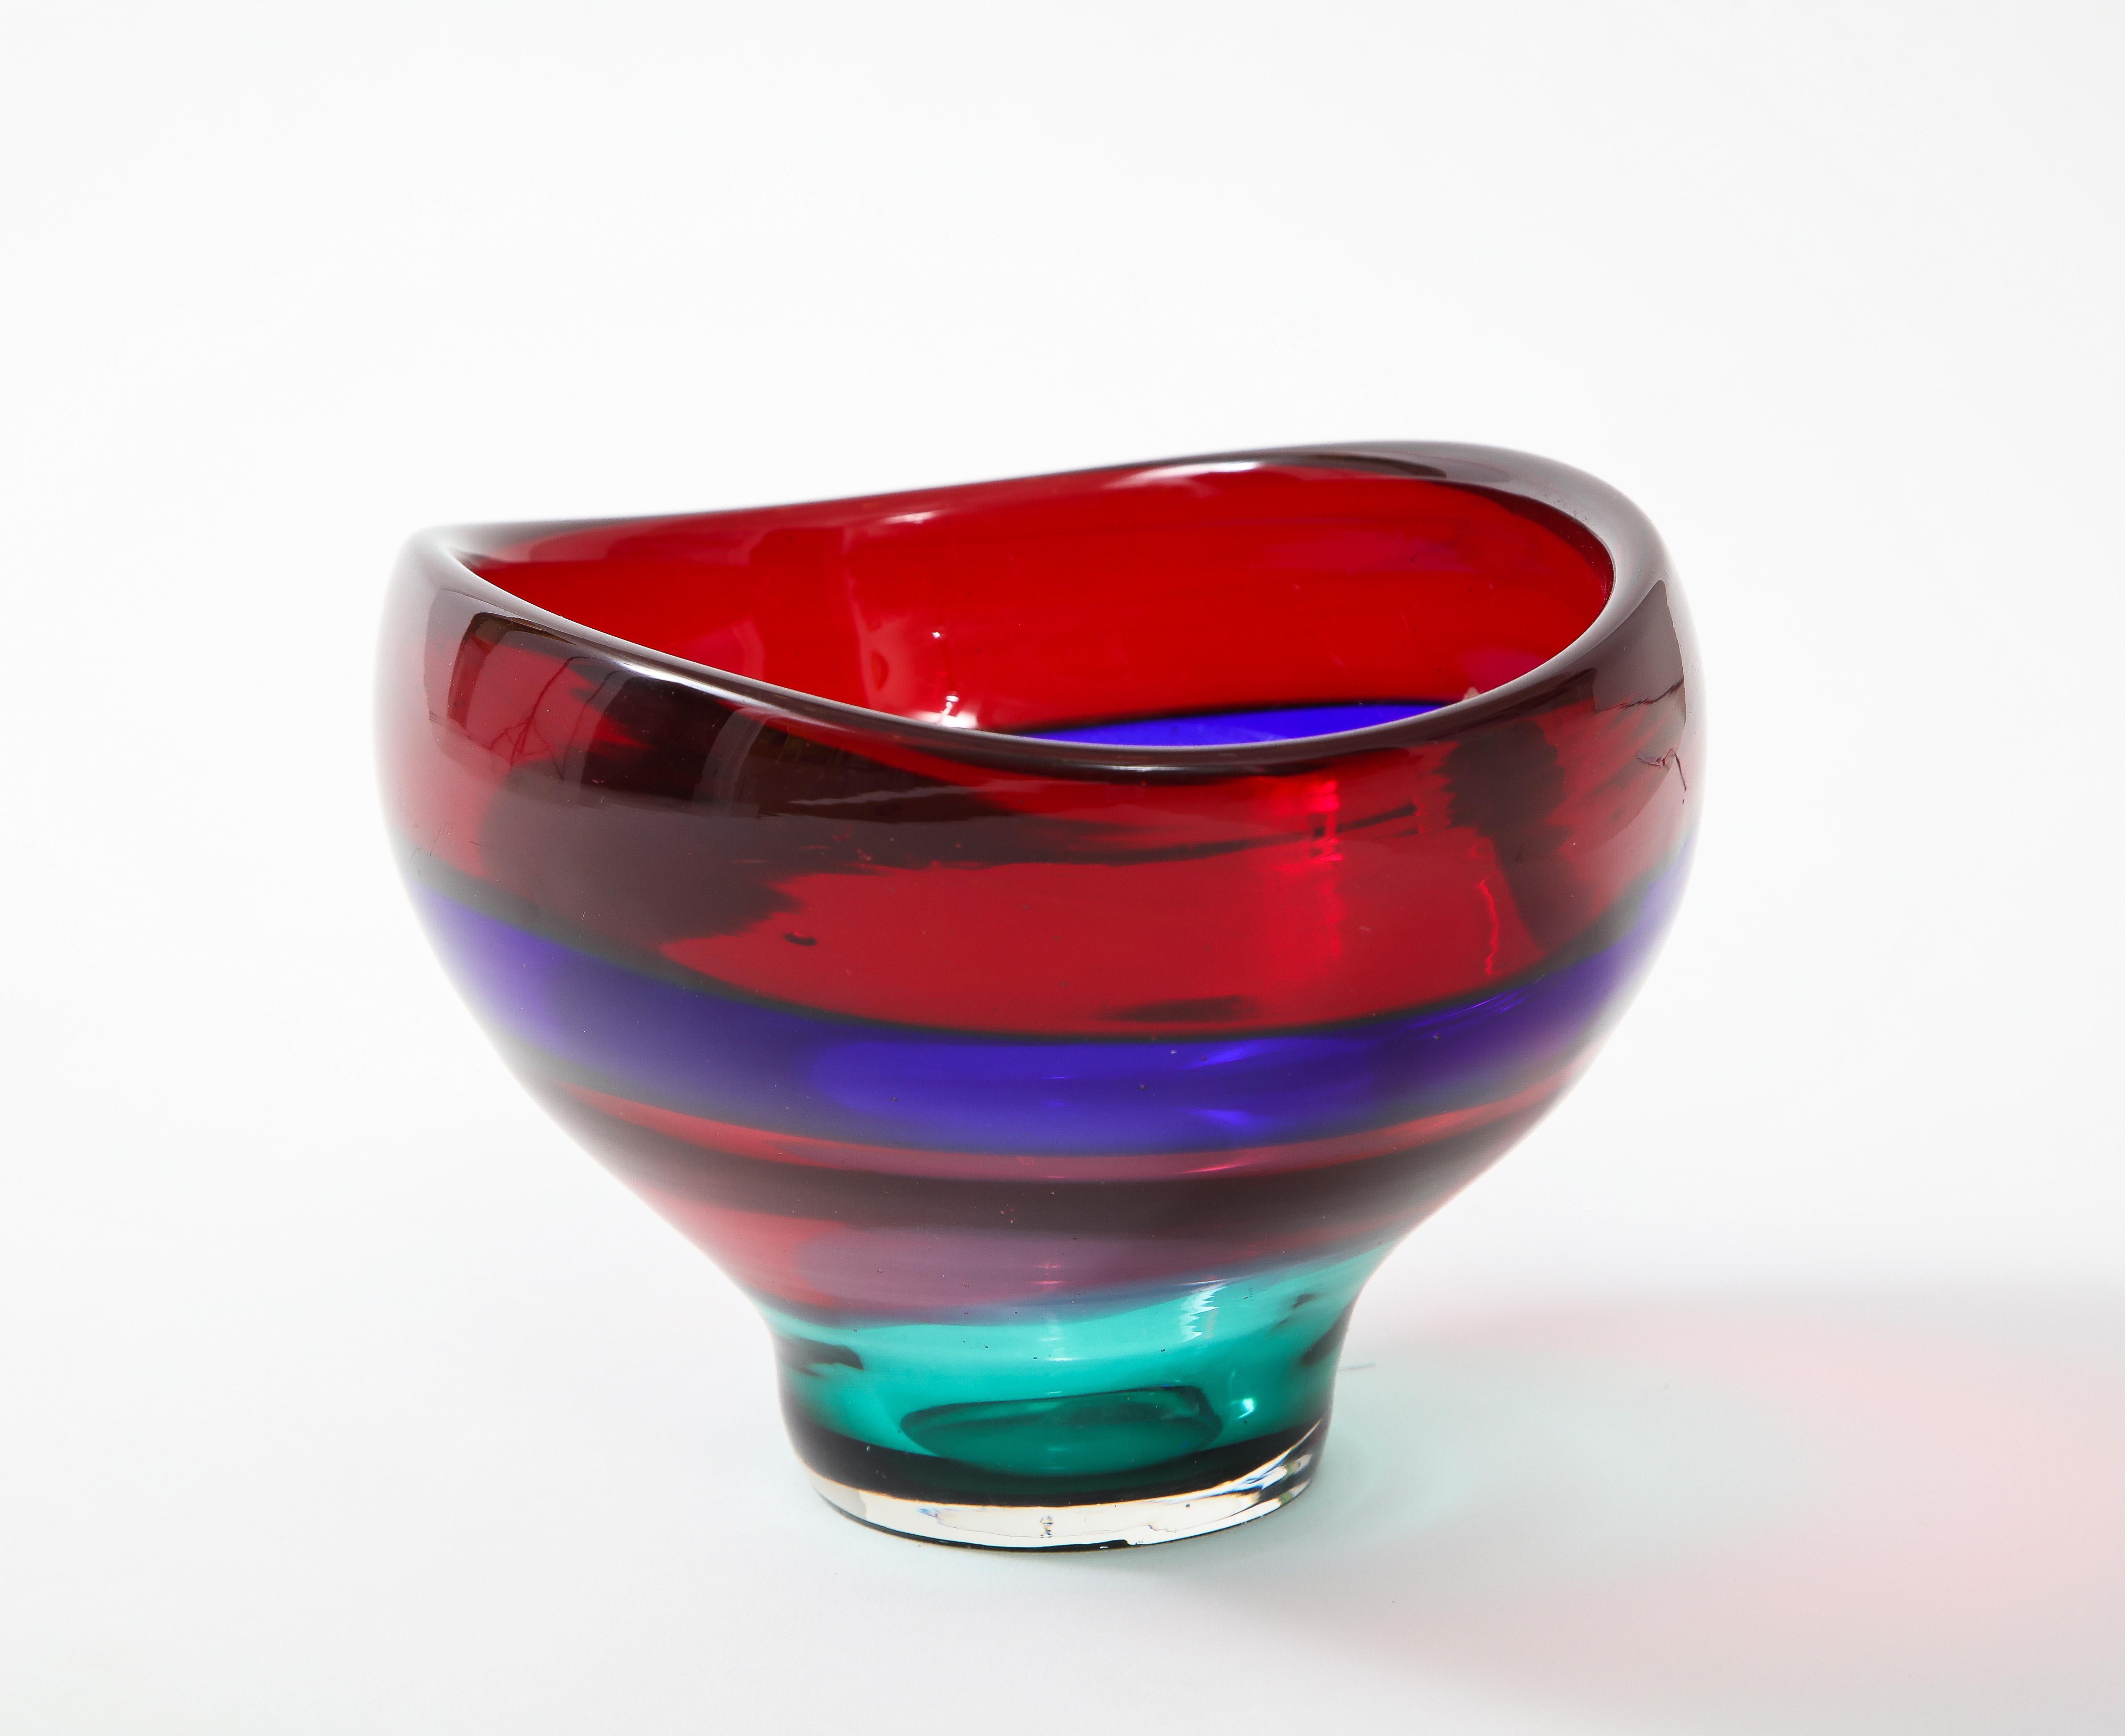 Mid-20th Century Vibrant Red Blue and Green Murano Glass Bowl by Fluvio Bianconi